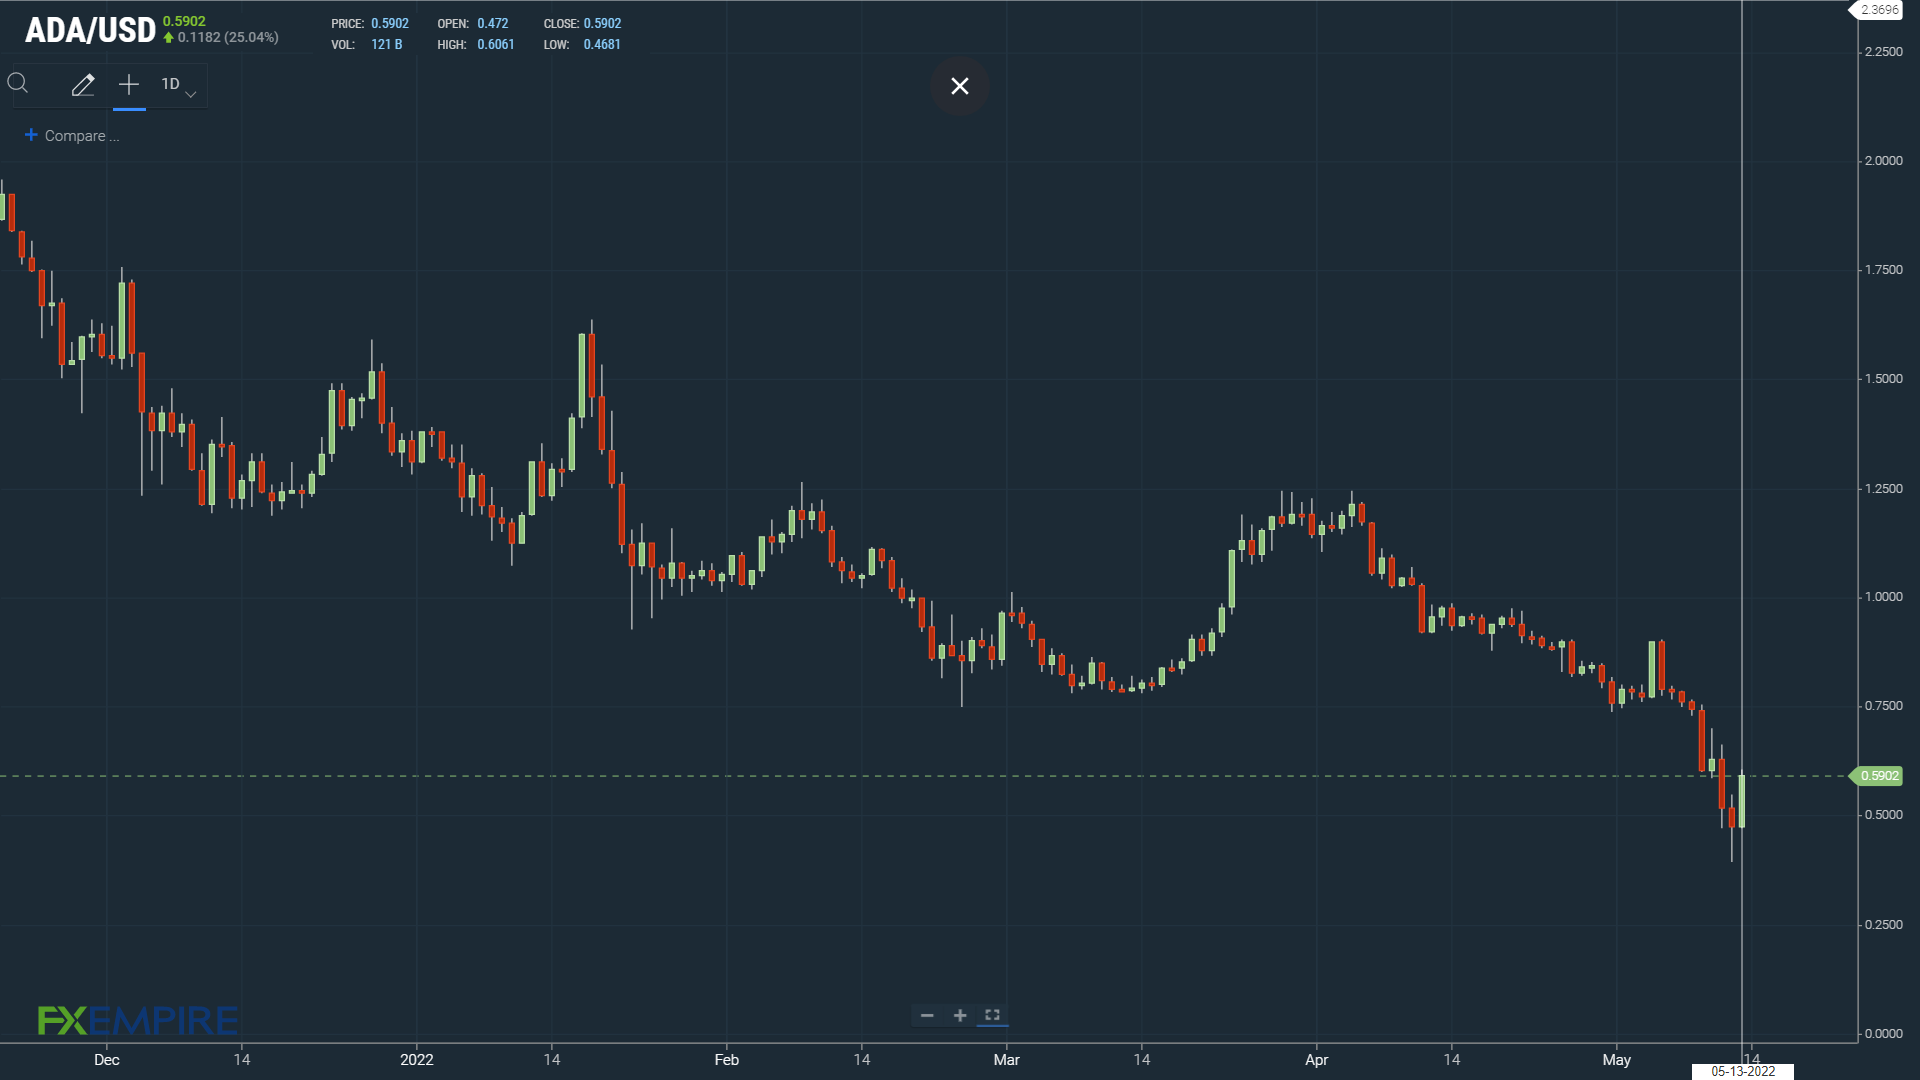 Cardano (ADA) on a breakout session.